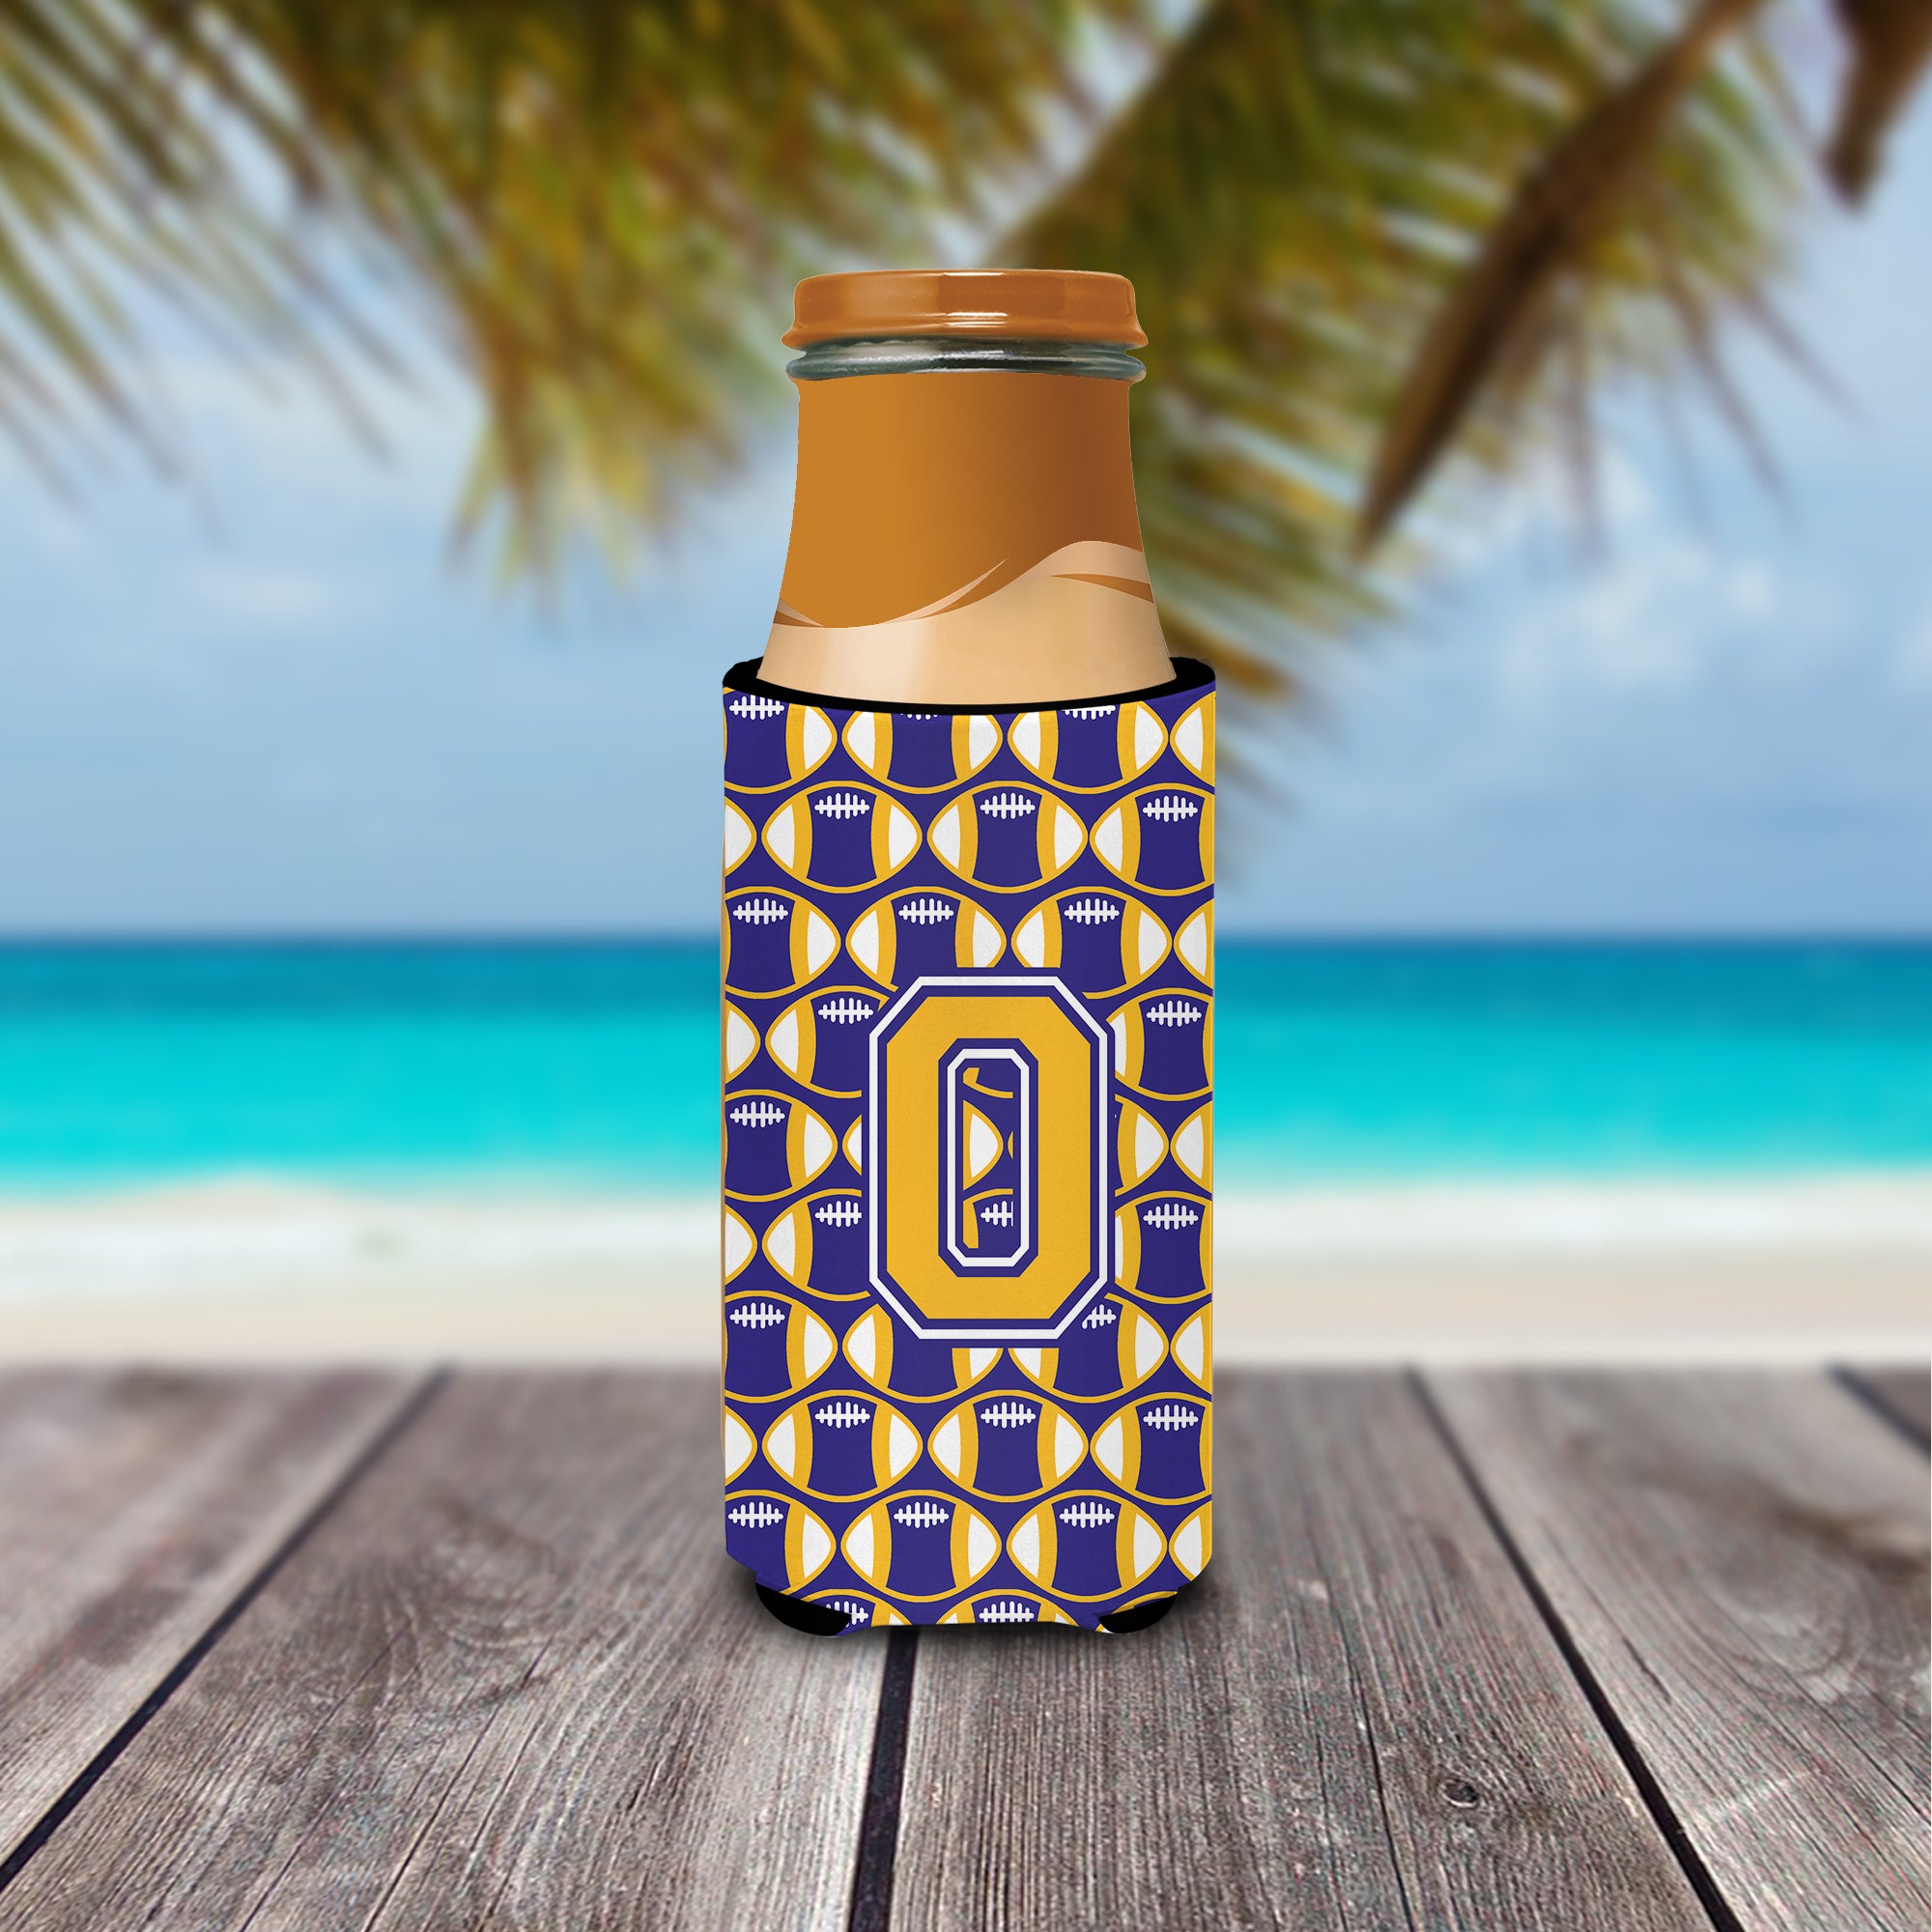 Letter O Football Purple and Gold Ultra Beverage Insulators for slim cans CJ1064-OMUK.